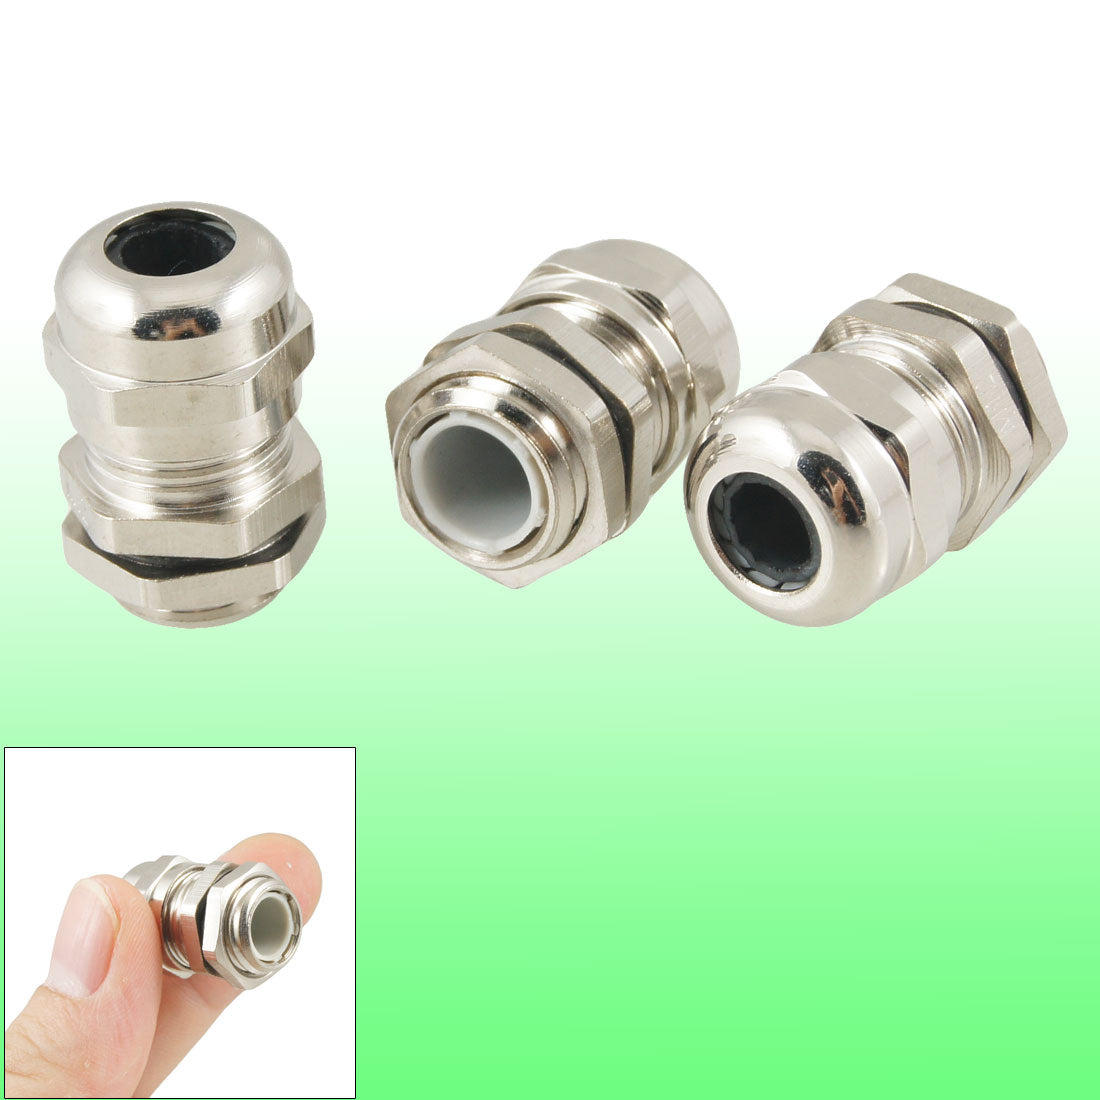 uxcell Uxcell Stainless Steel M12 3.0-6.5mmm Waterproof Connector Cable Gland 3 Pcs